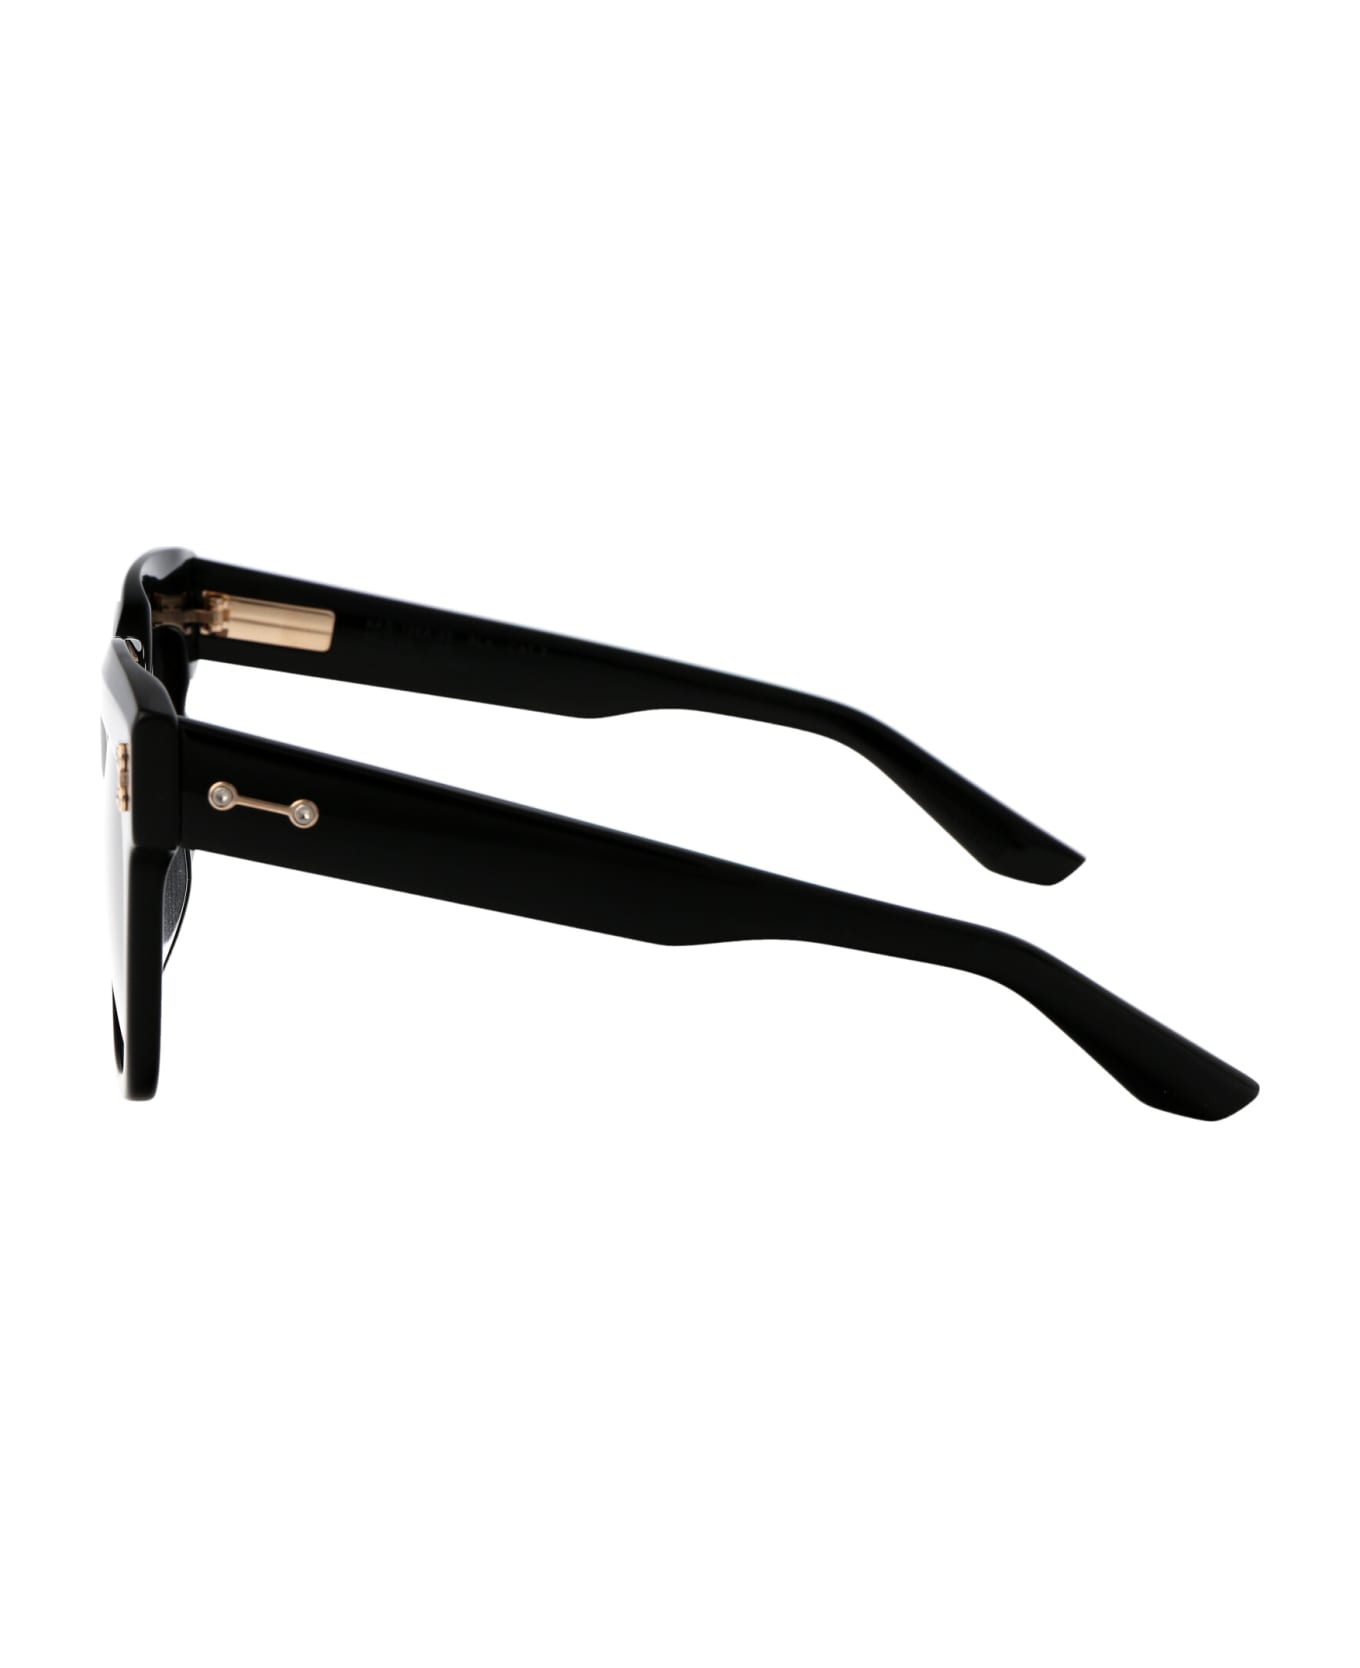 Akoni Lyra Sunglasses cat-eye - Complement your chic style with a fabulous pair of sunglasses